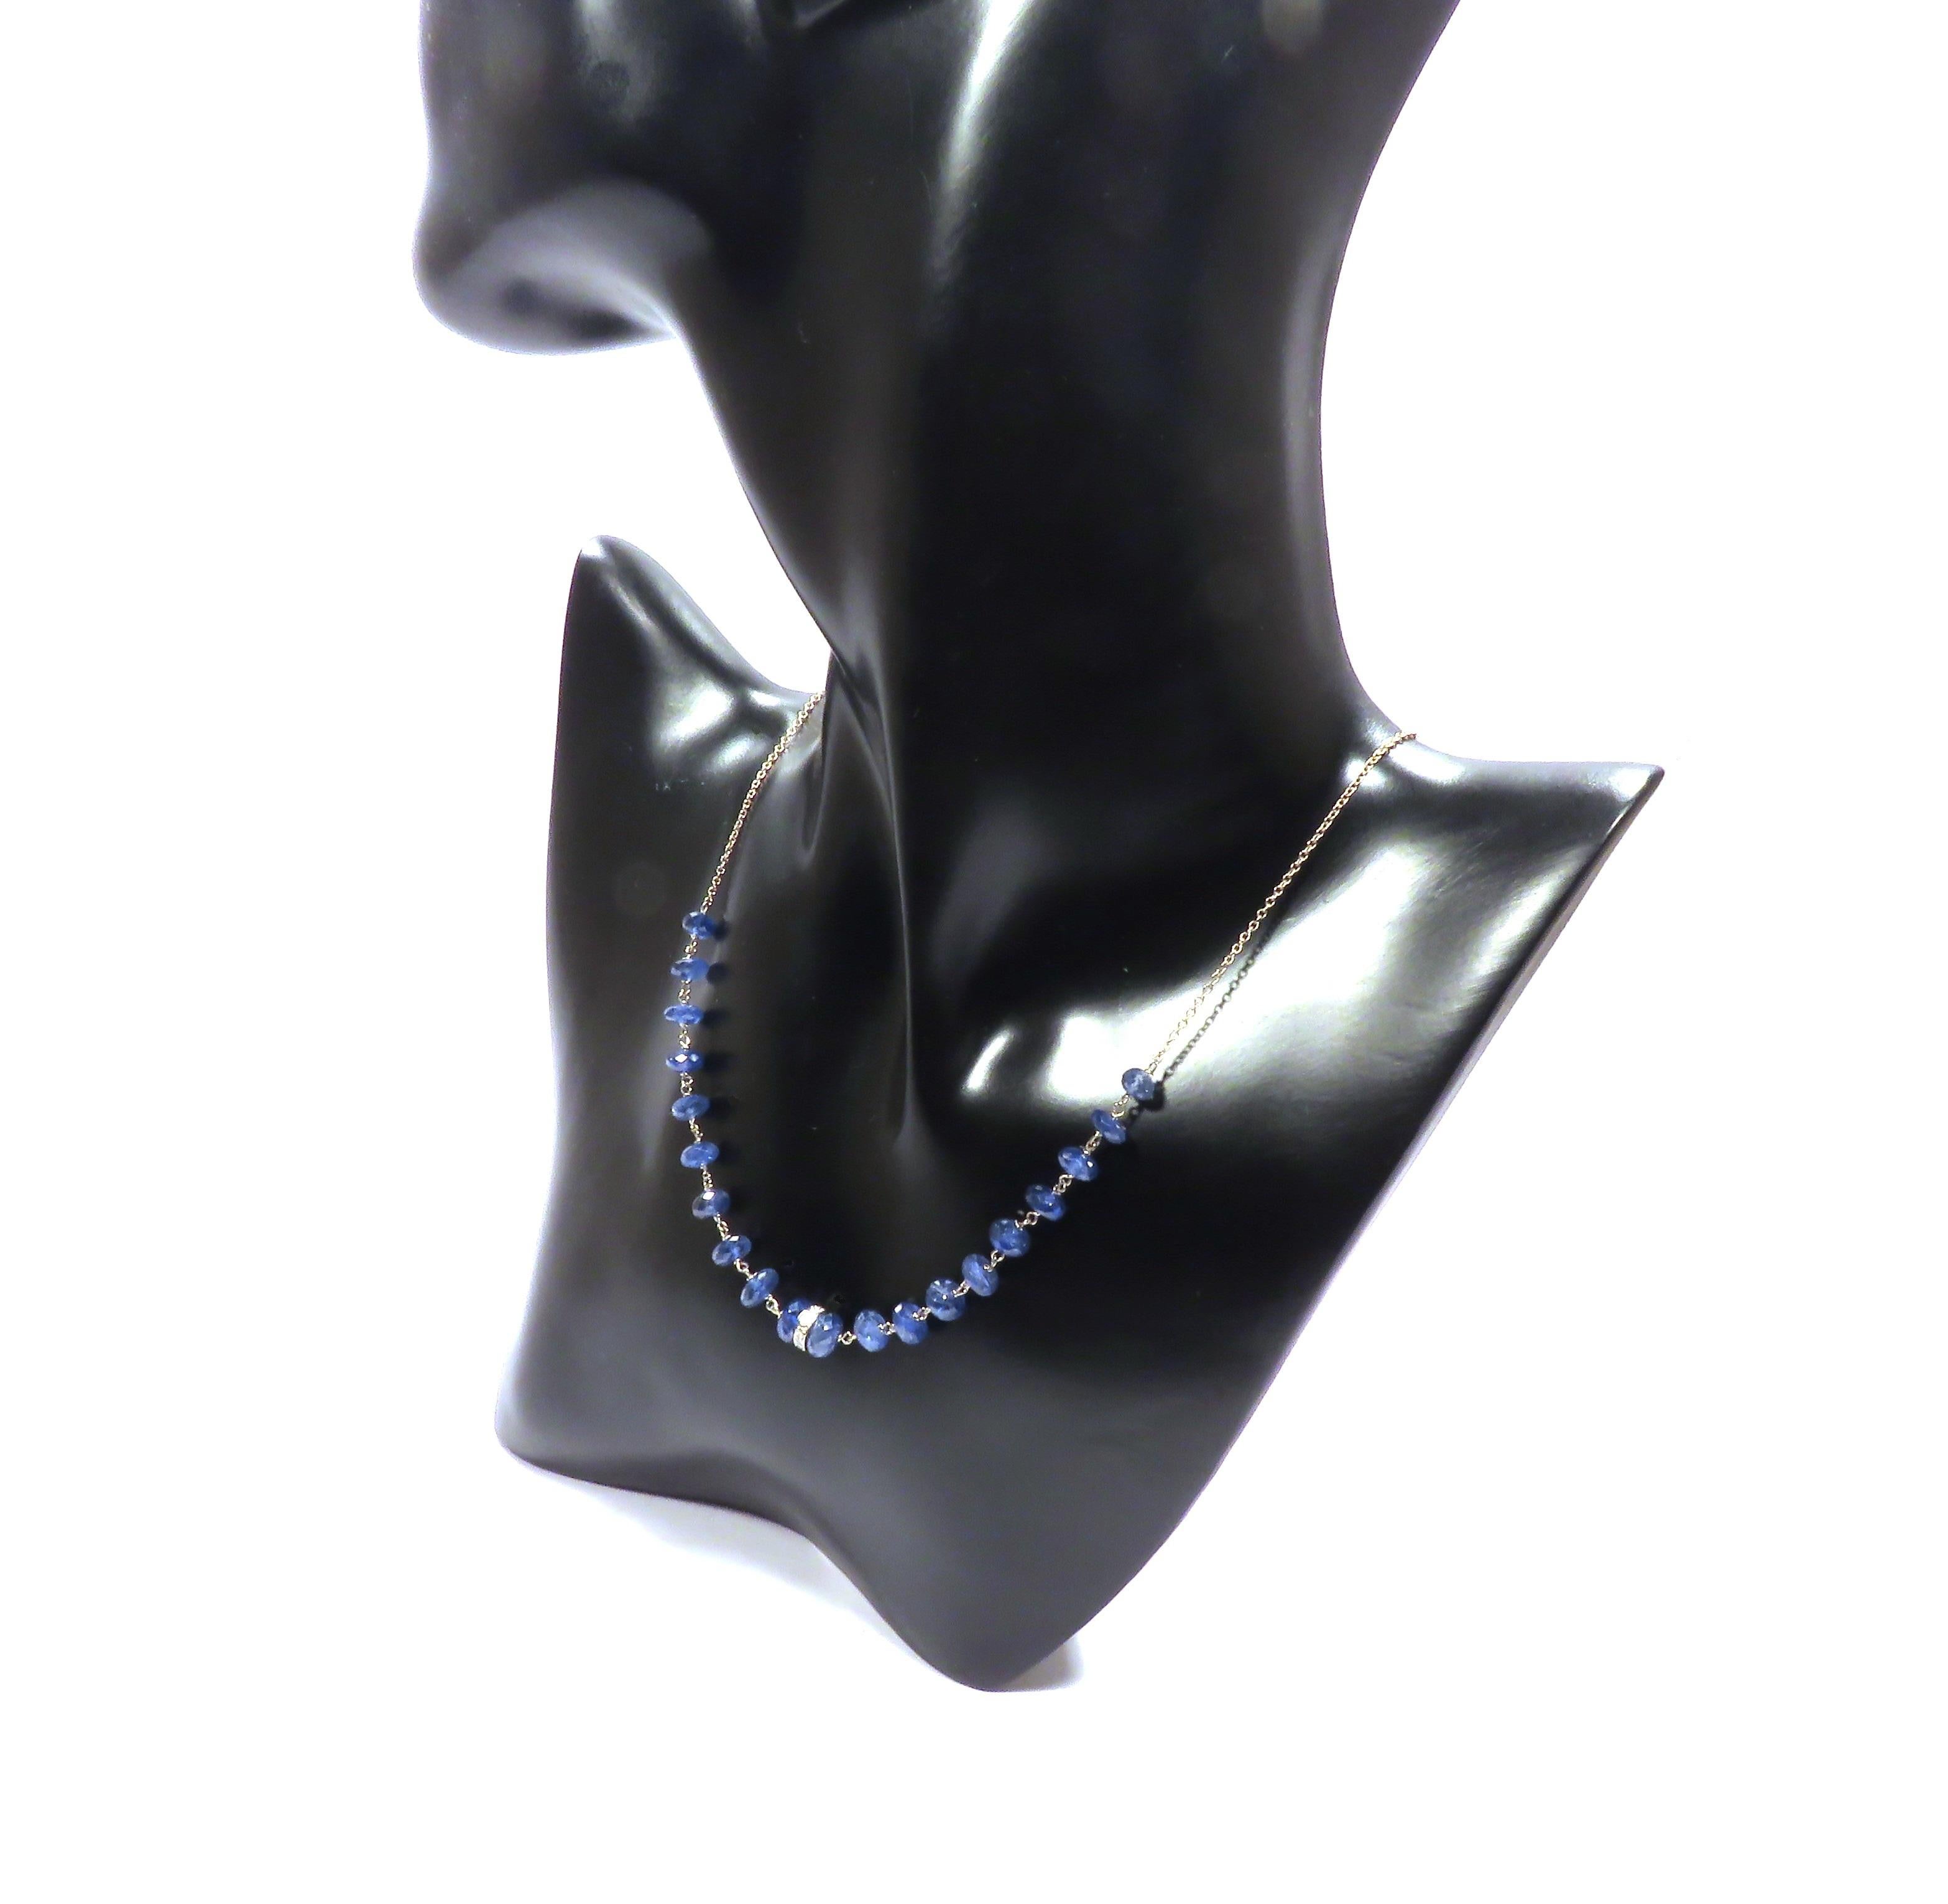 Ball Cut Diamonds Blue Sapphires 9 Karat White Gold Choker Necklace Handcrafted in Italy